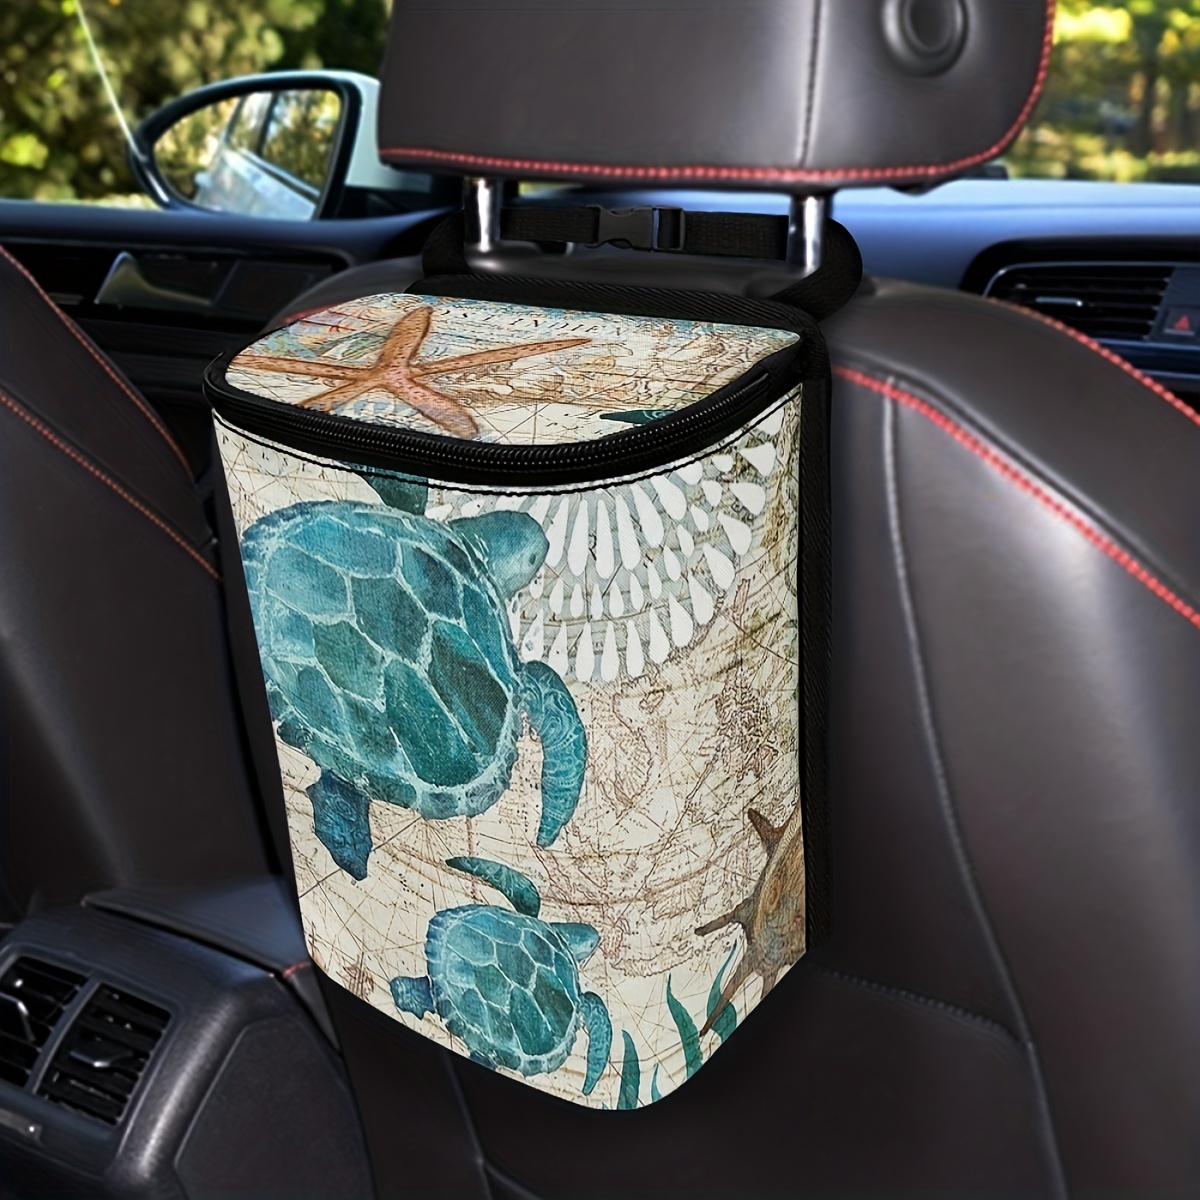 

1pc Vintage Sea Turtle Car Trash Can - Women Trash Bag For Car, Vehicles Interior Accessories, Storage Bag For Home, Travel, Picnic